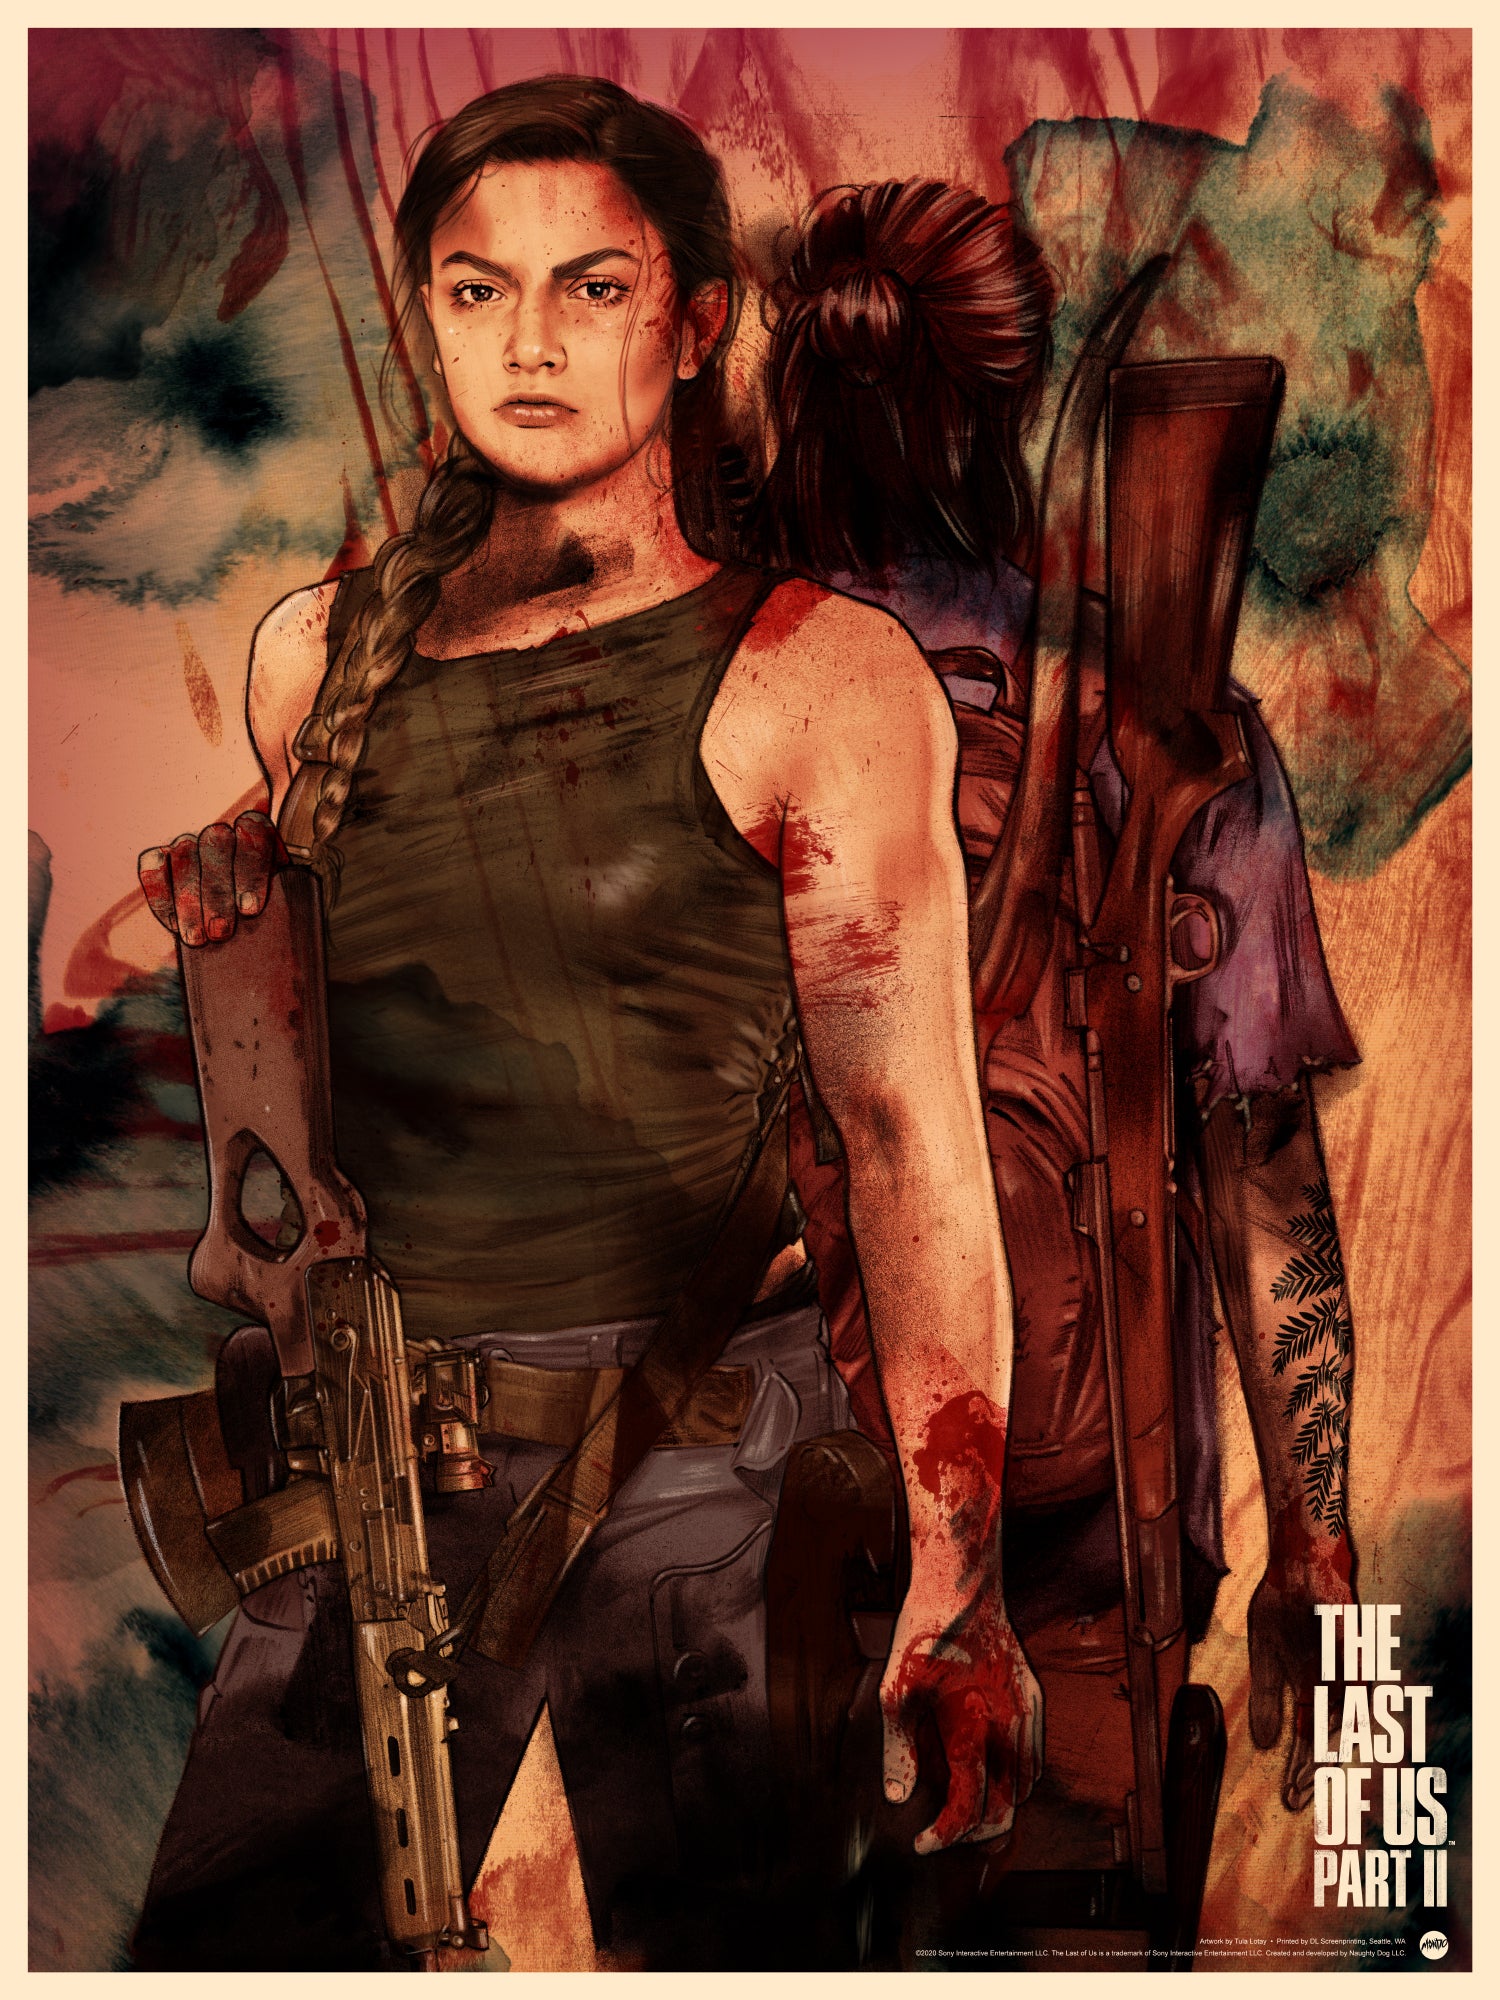 The Last of Us Day 2020 Preview: Celebrate with New Posters